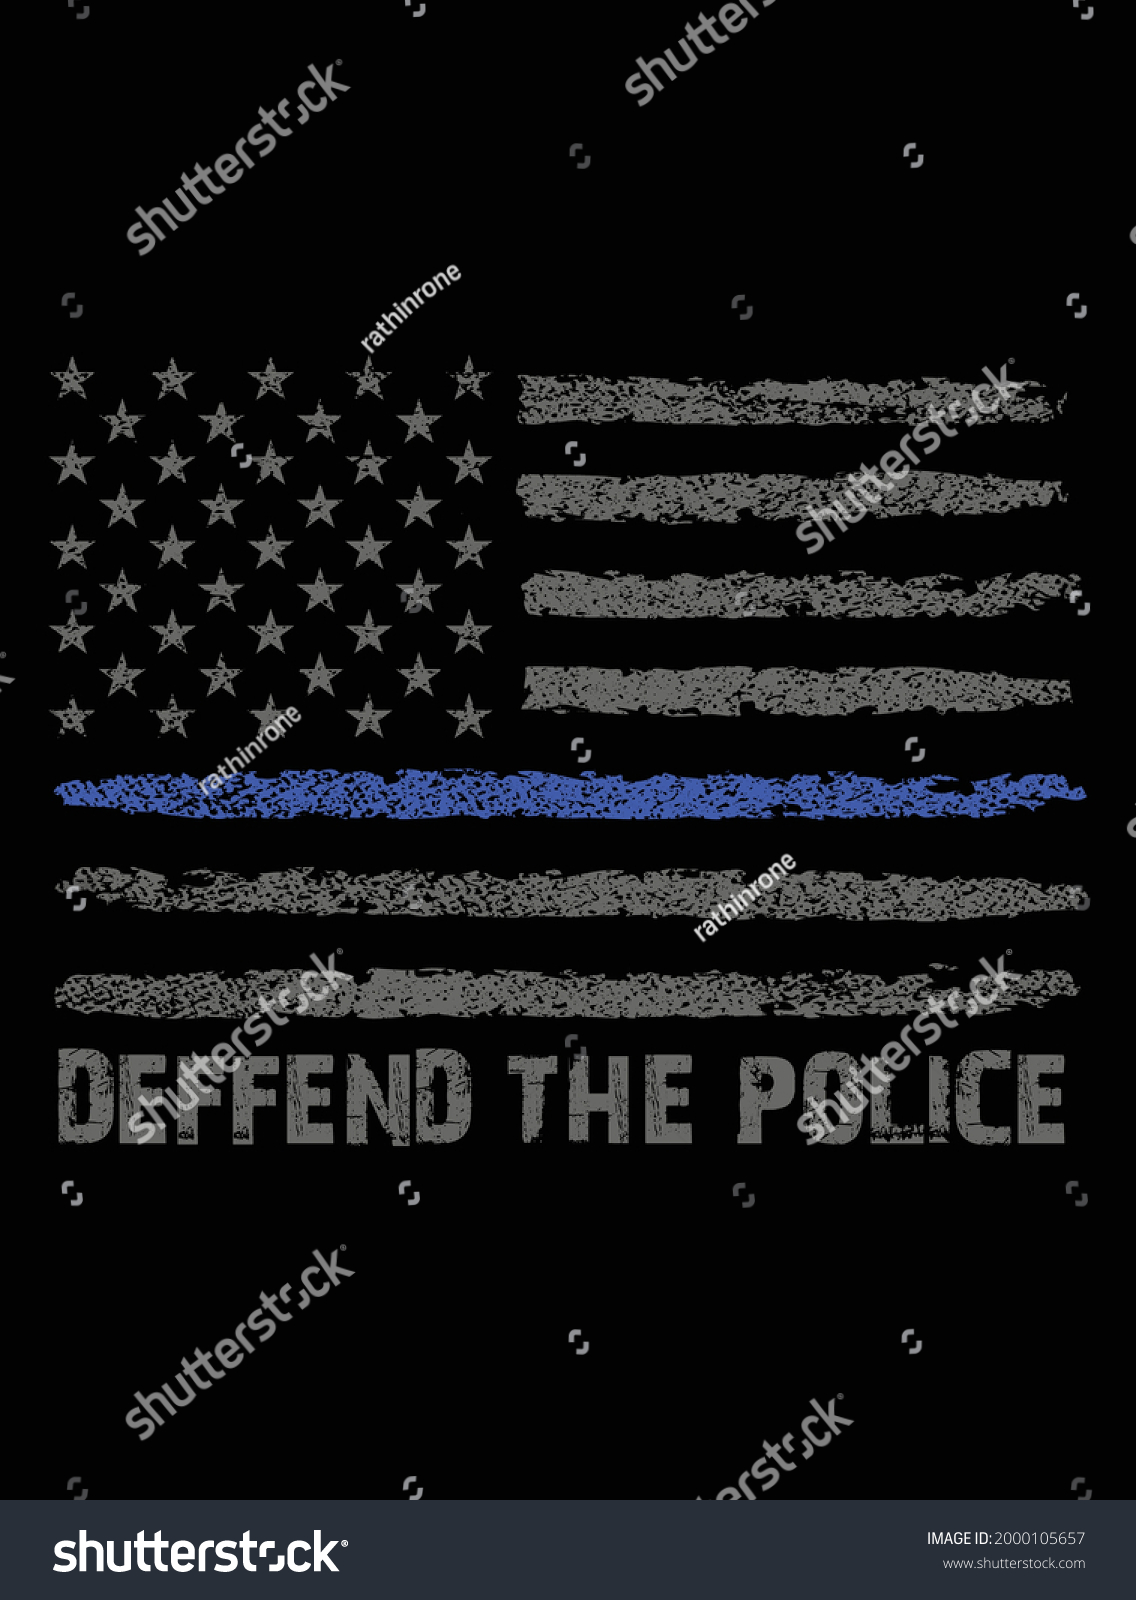 SVG of Deffend the police usa thin blue line police flag t-shirt design svg